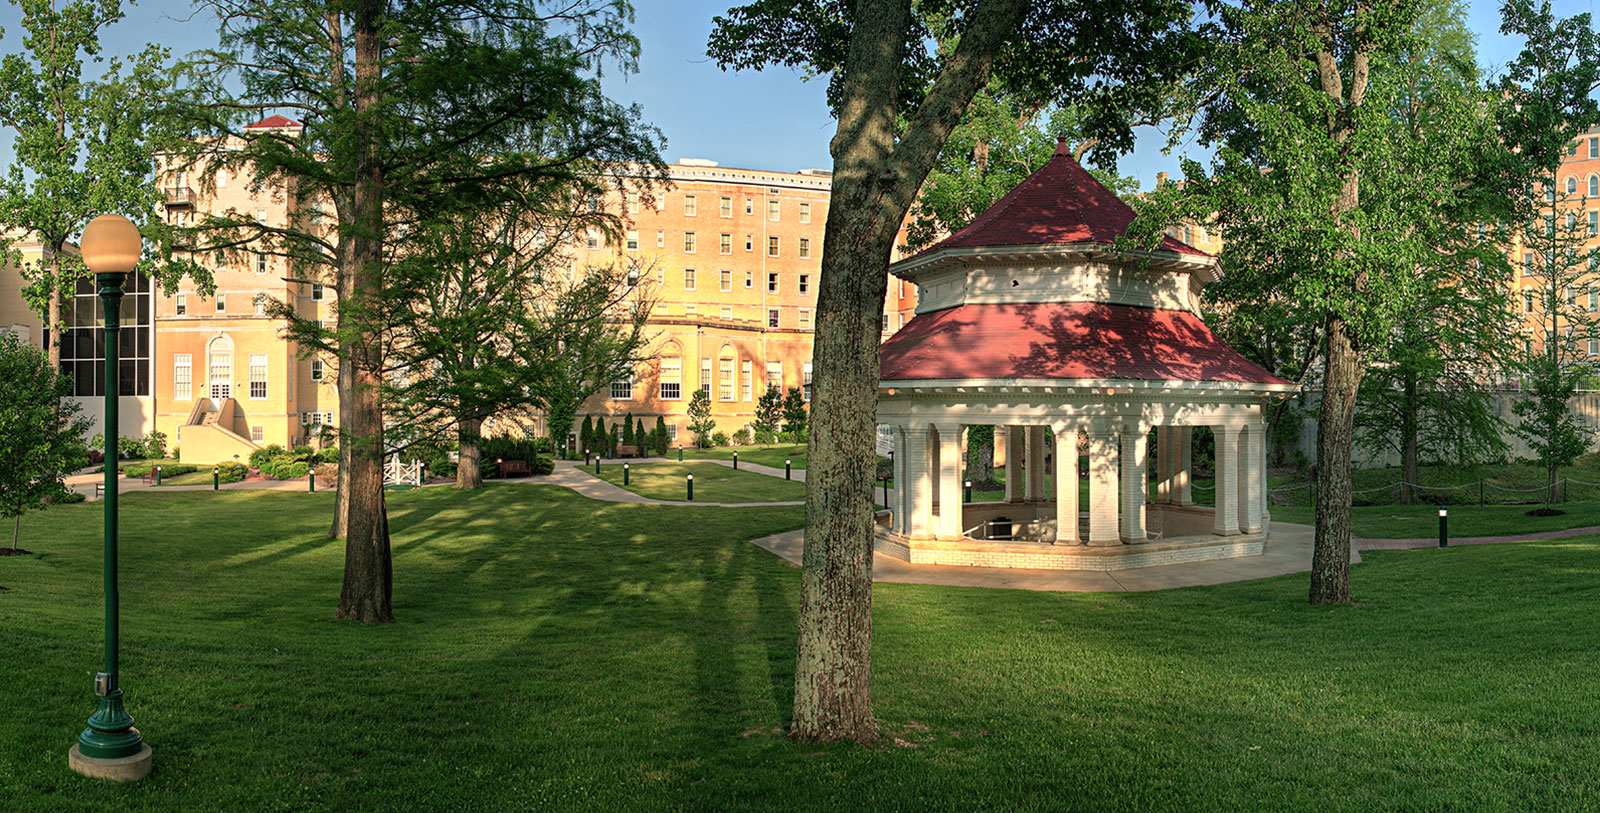 Experience the historic mineral waters of the French Lick Springs Hotel.